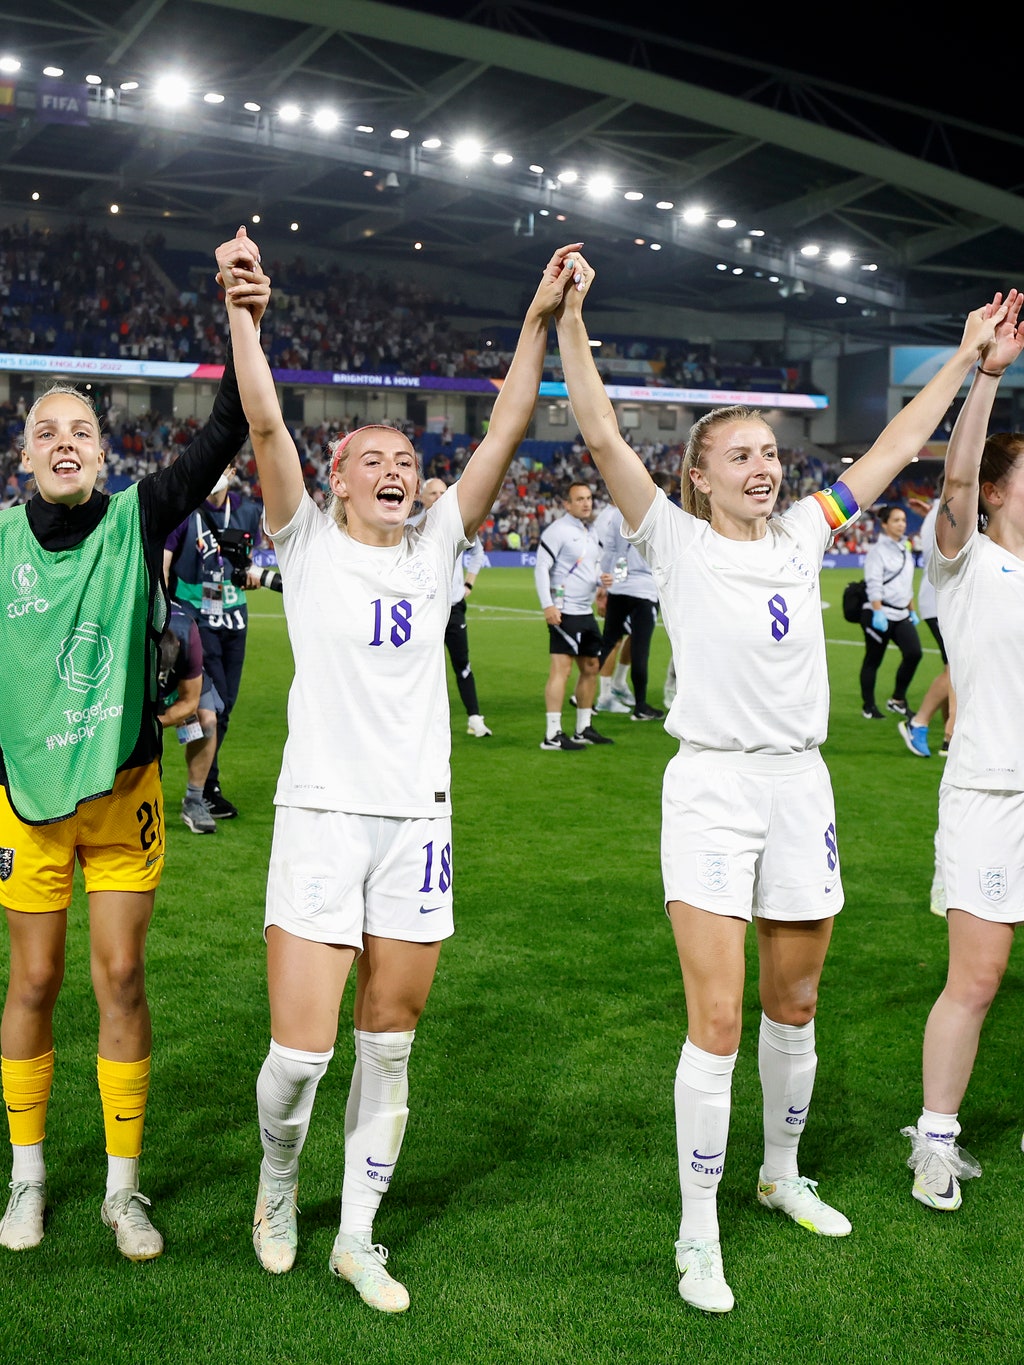 How England hosted the biggest Women's Euros ever